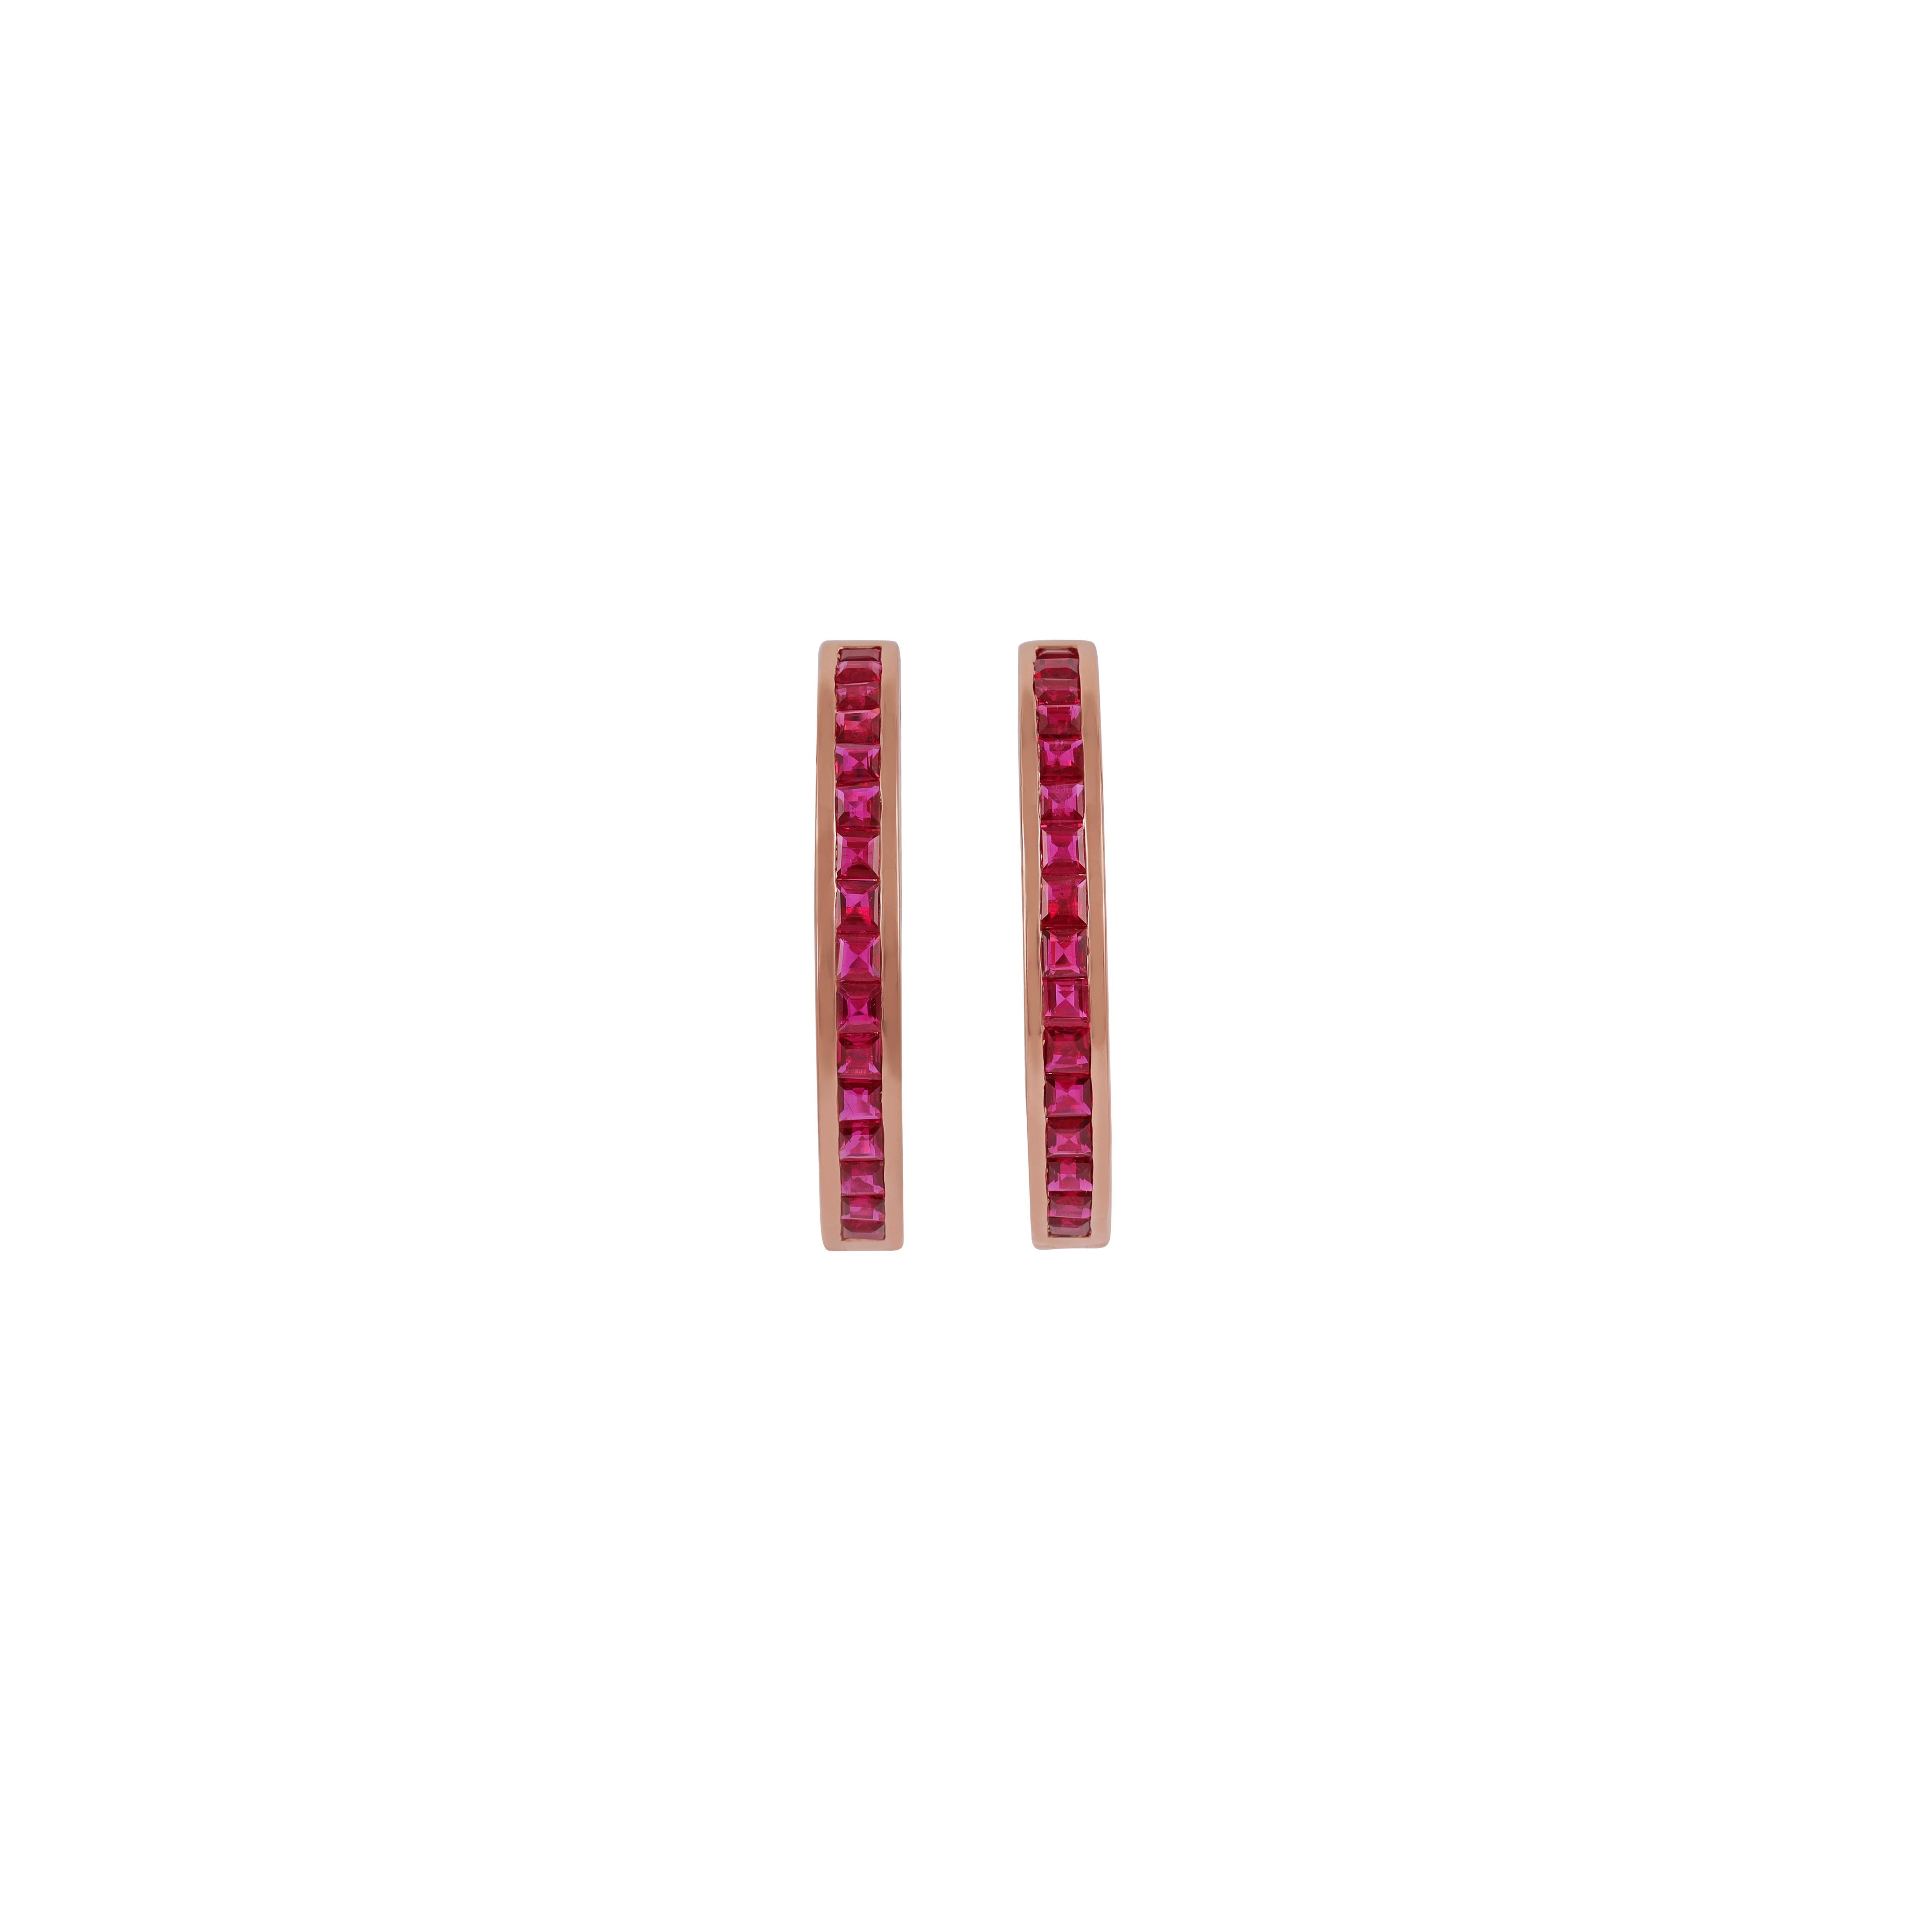 Magnificent Mozambique Ruby Dangle Earrings
 Mozambique Ruby approx. 3.10 CTS
18 k Rose gold mounting 4.97 GMS

Custom Services
Request Customization